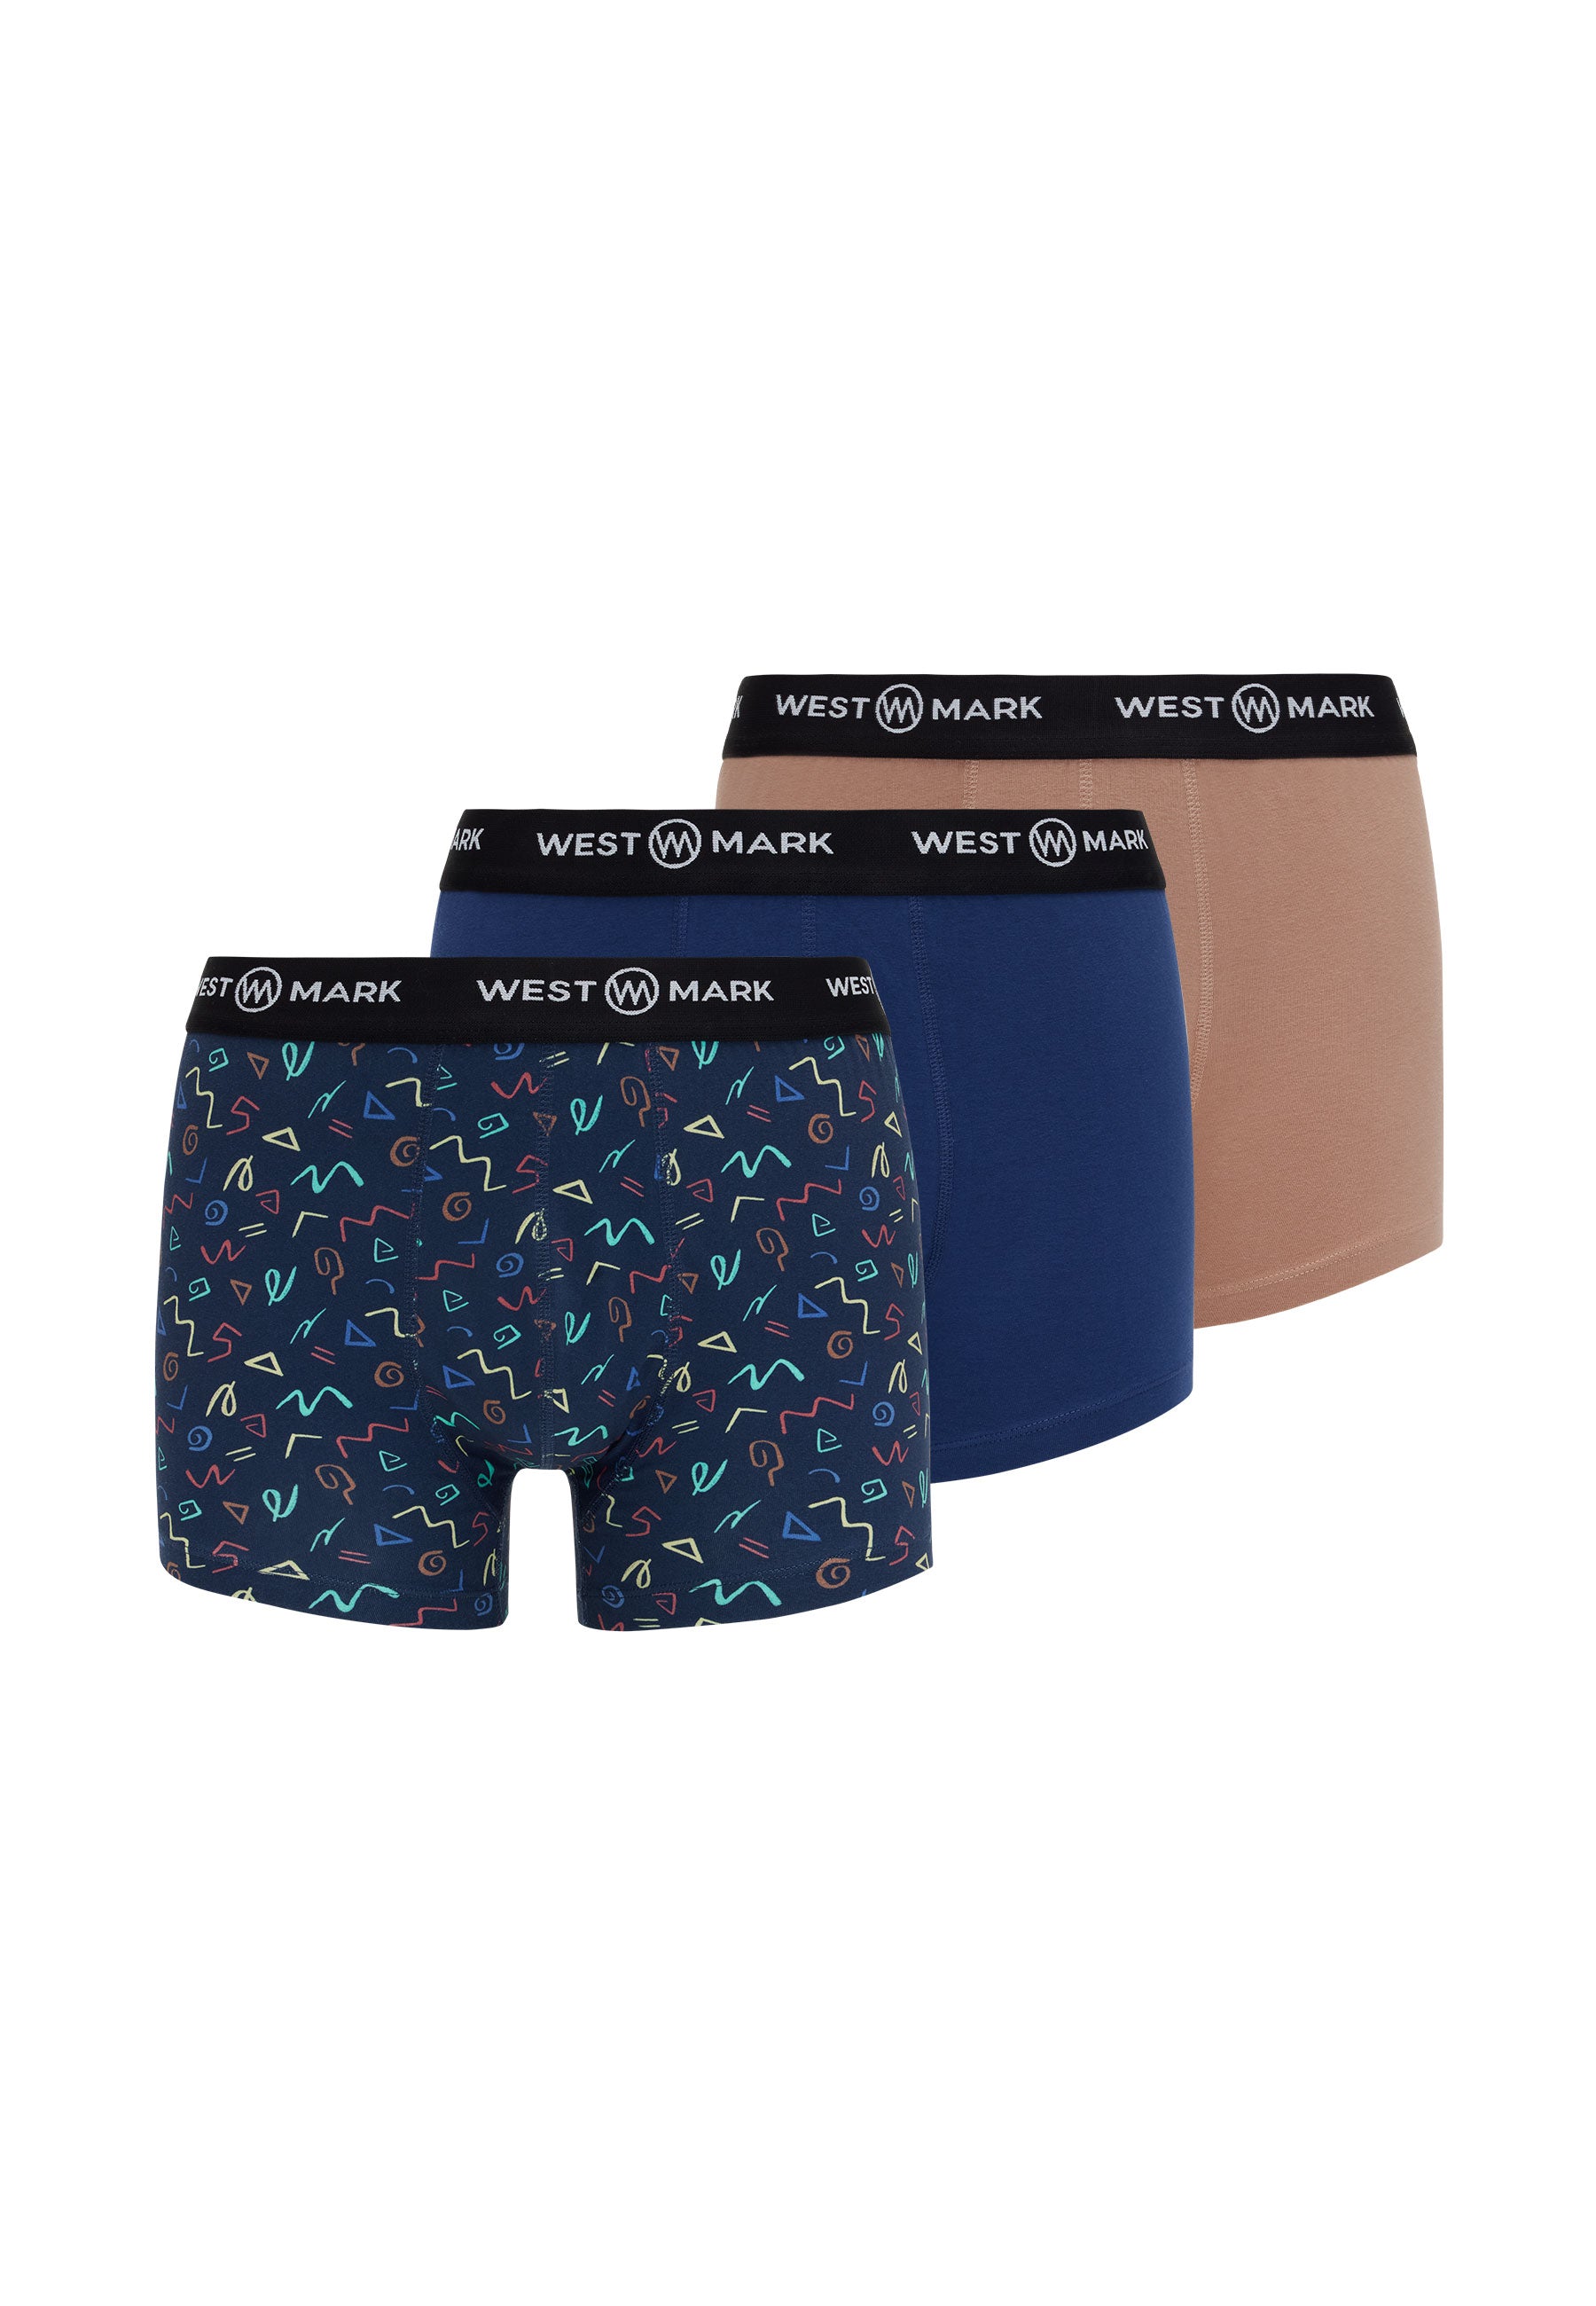 OSCAR 3-PACK WINTER ICONS in Navy, Brown